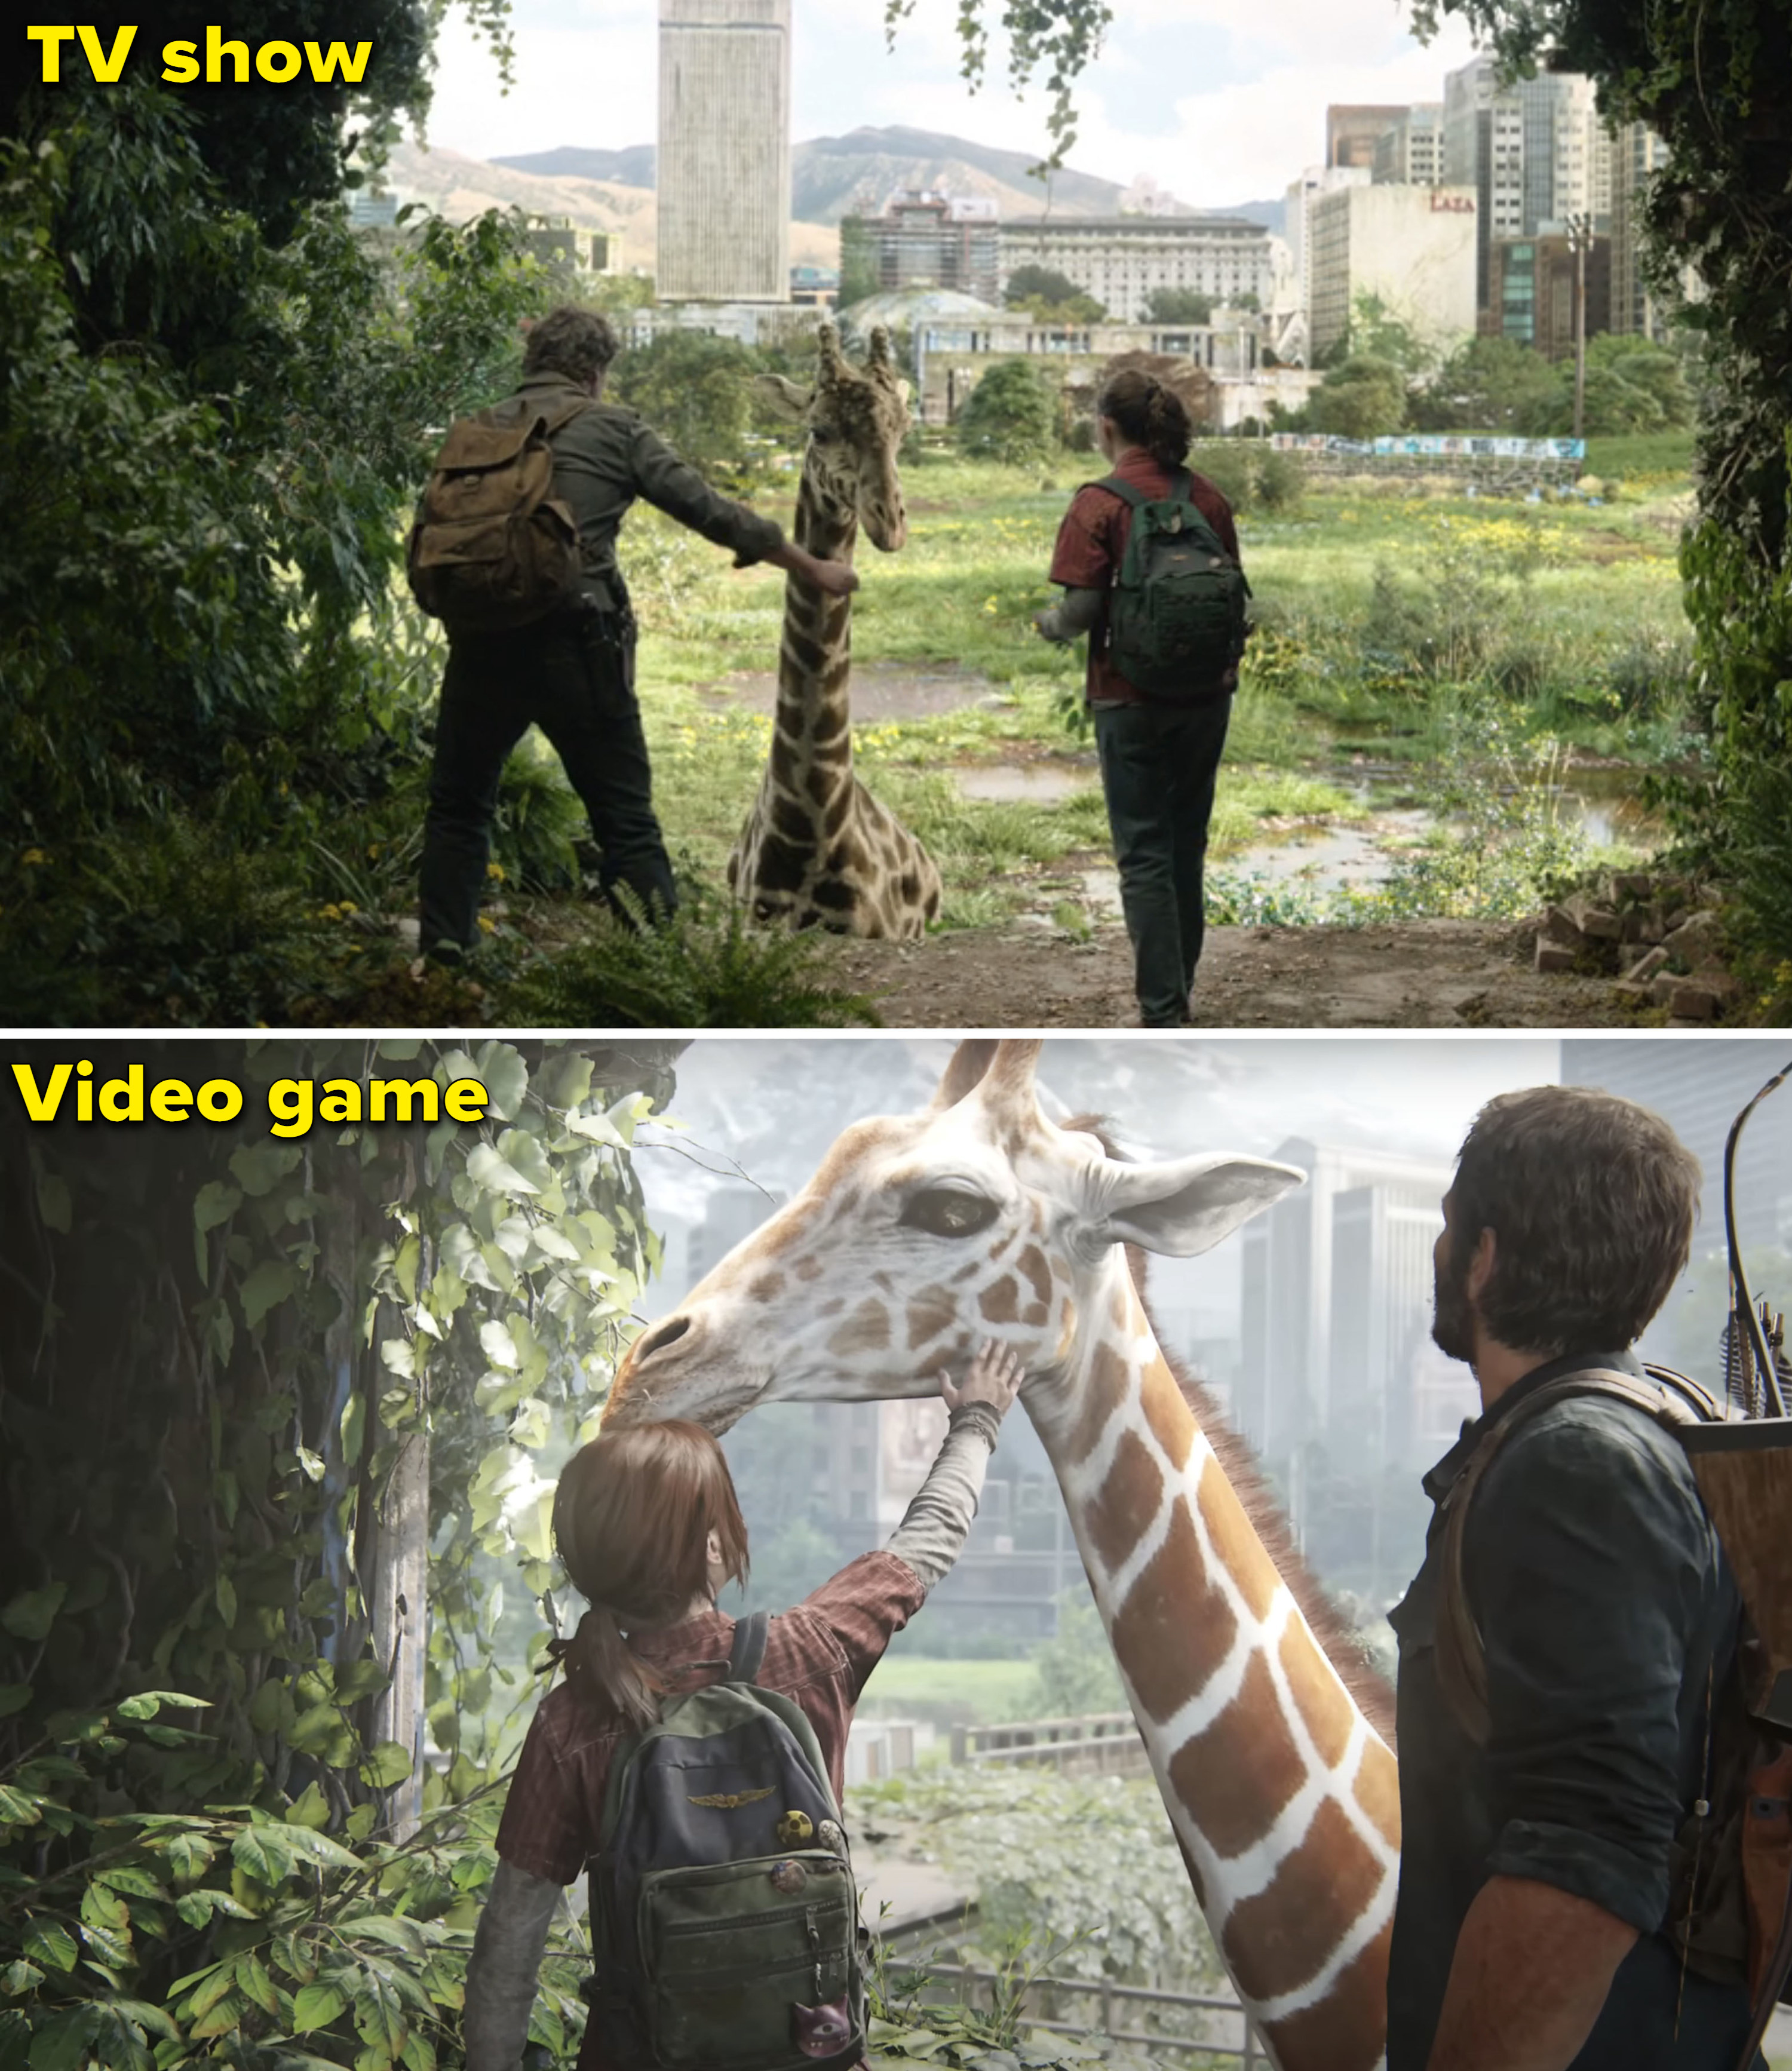 🎥THE LAST OF US Episode 3 - Show vs Game Side by Side Comparison